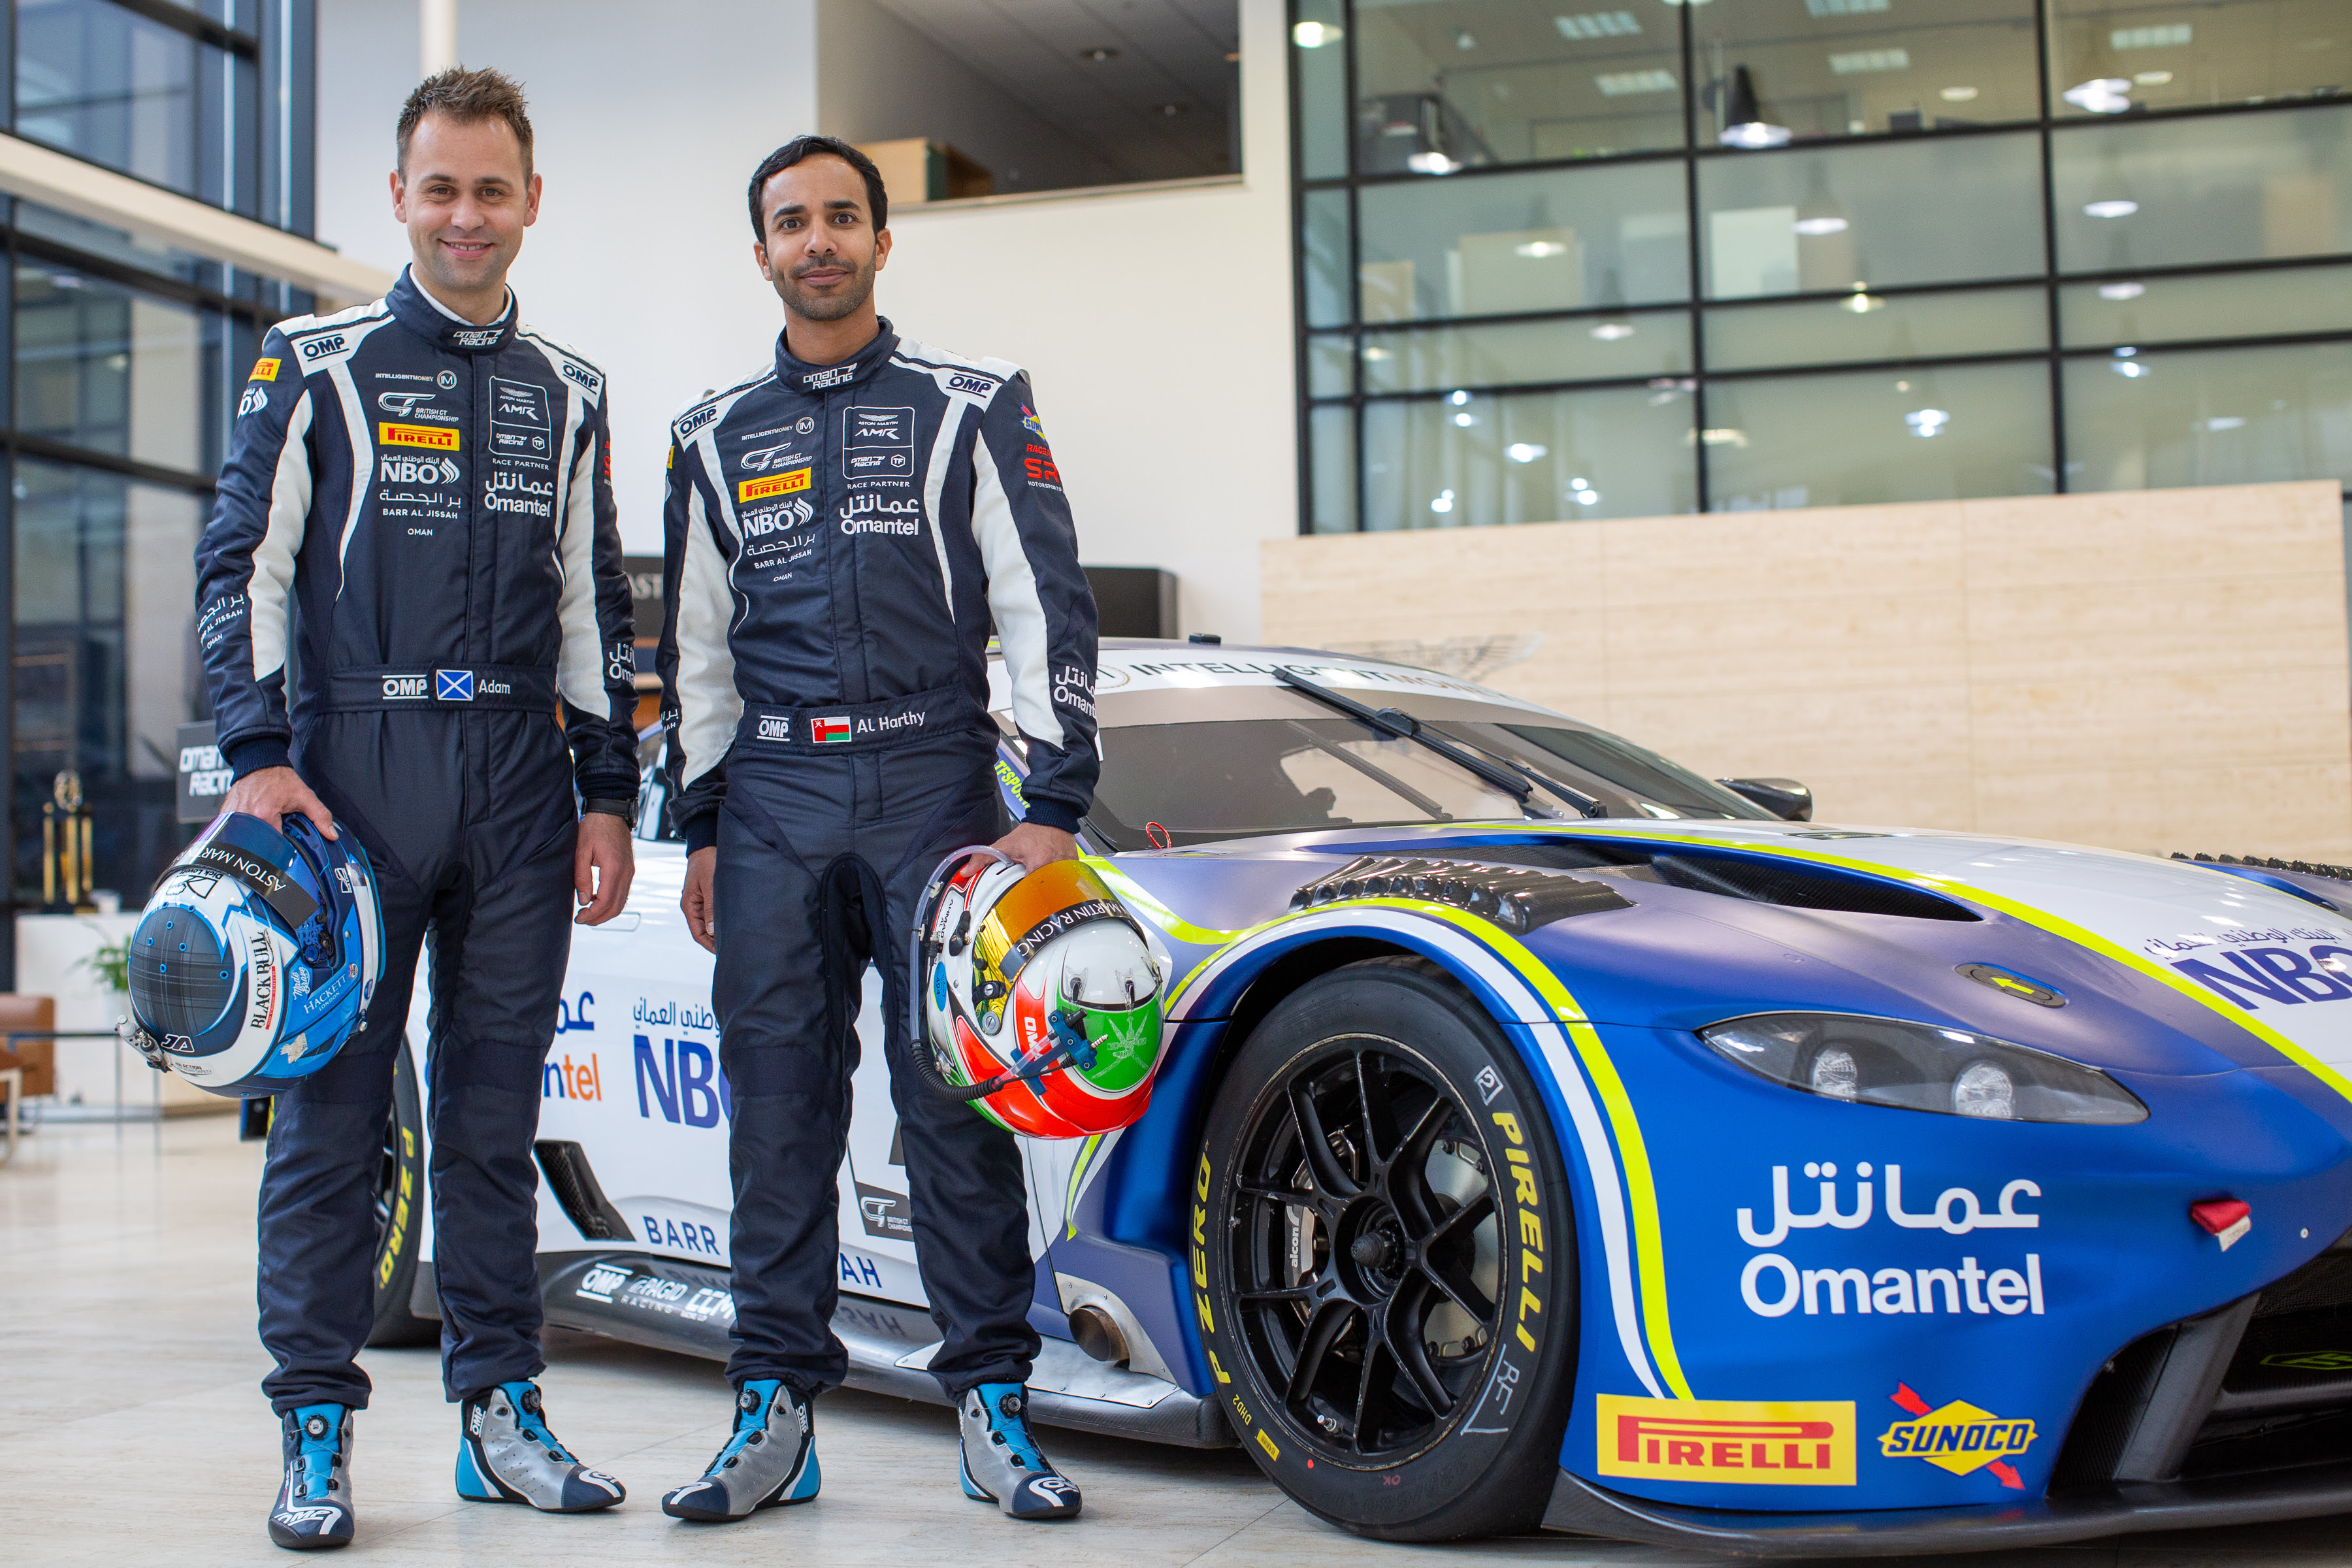 Oman's Al Harthy eyeing overall British GT title